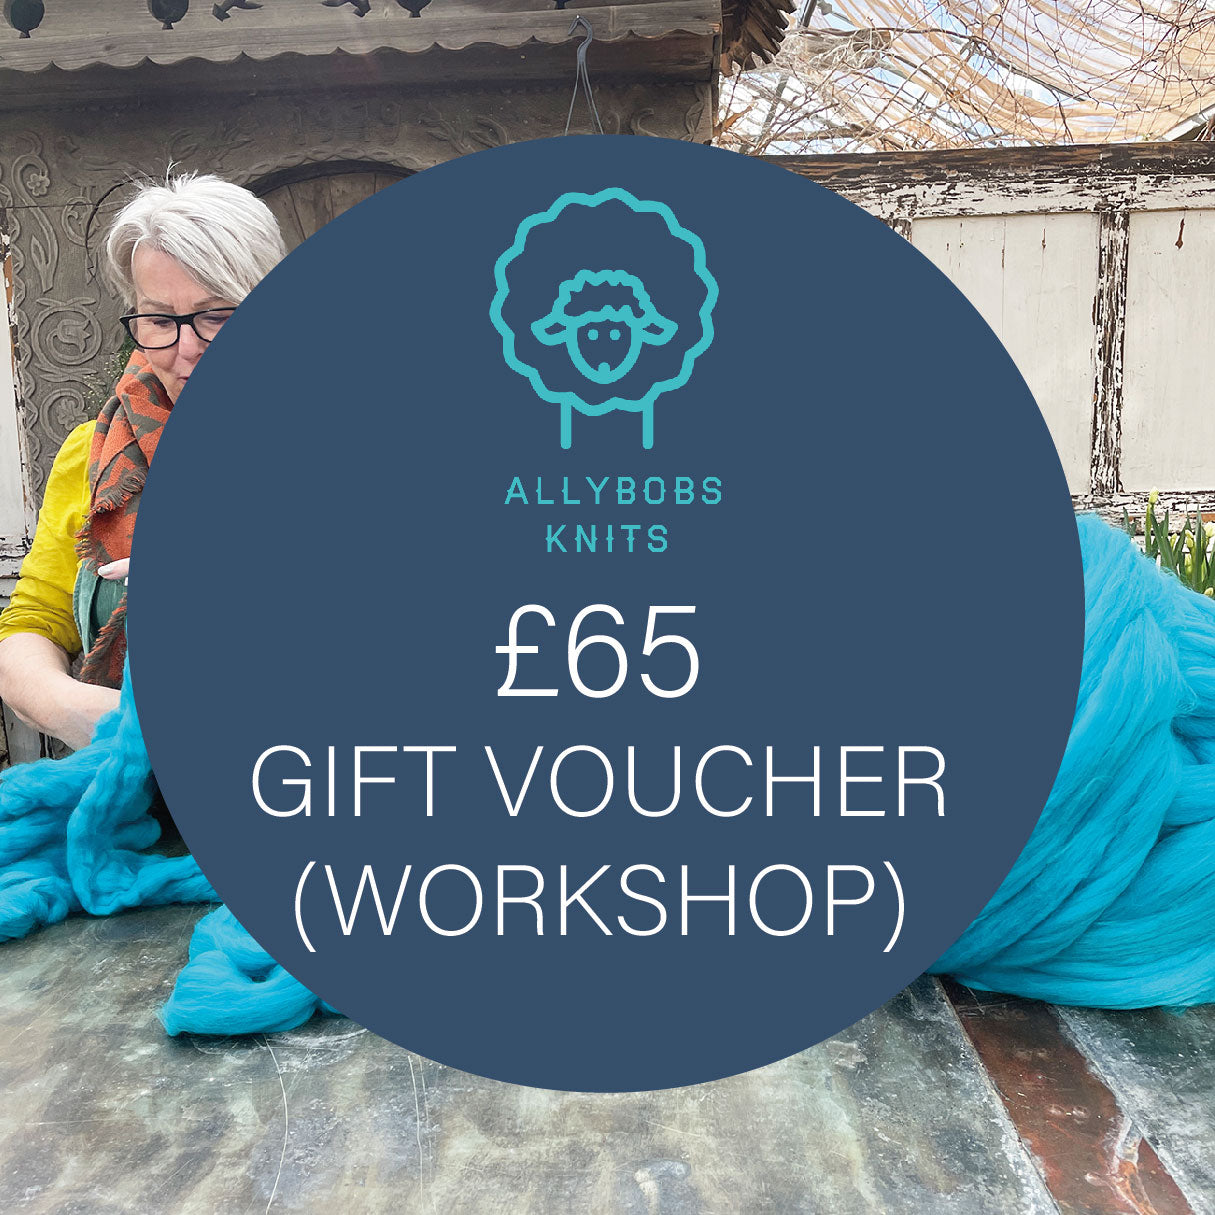 a £65 gift voucher for arm knitting